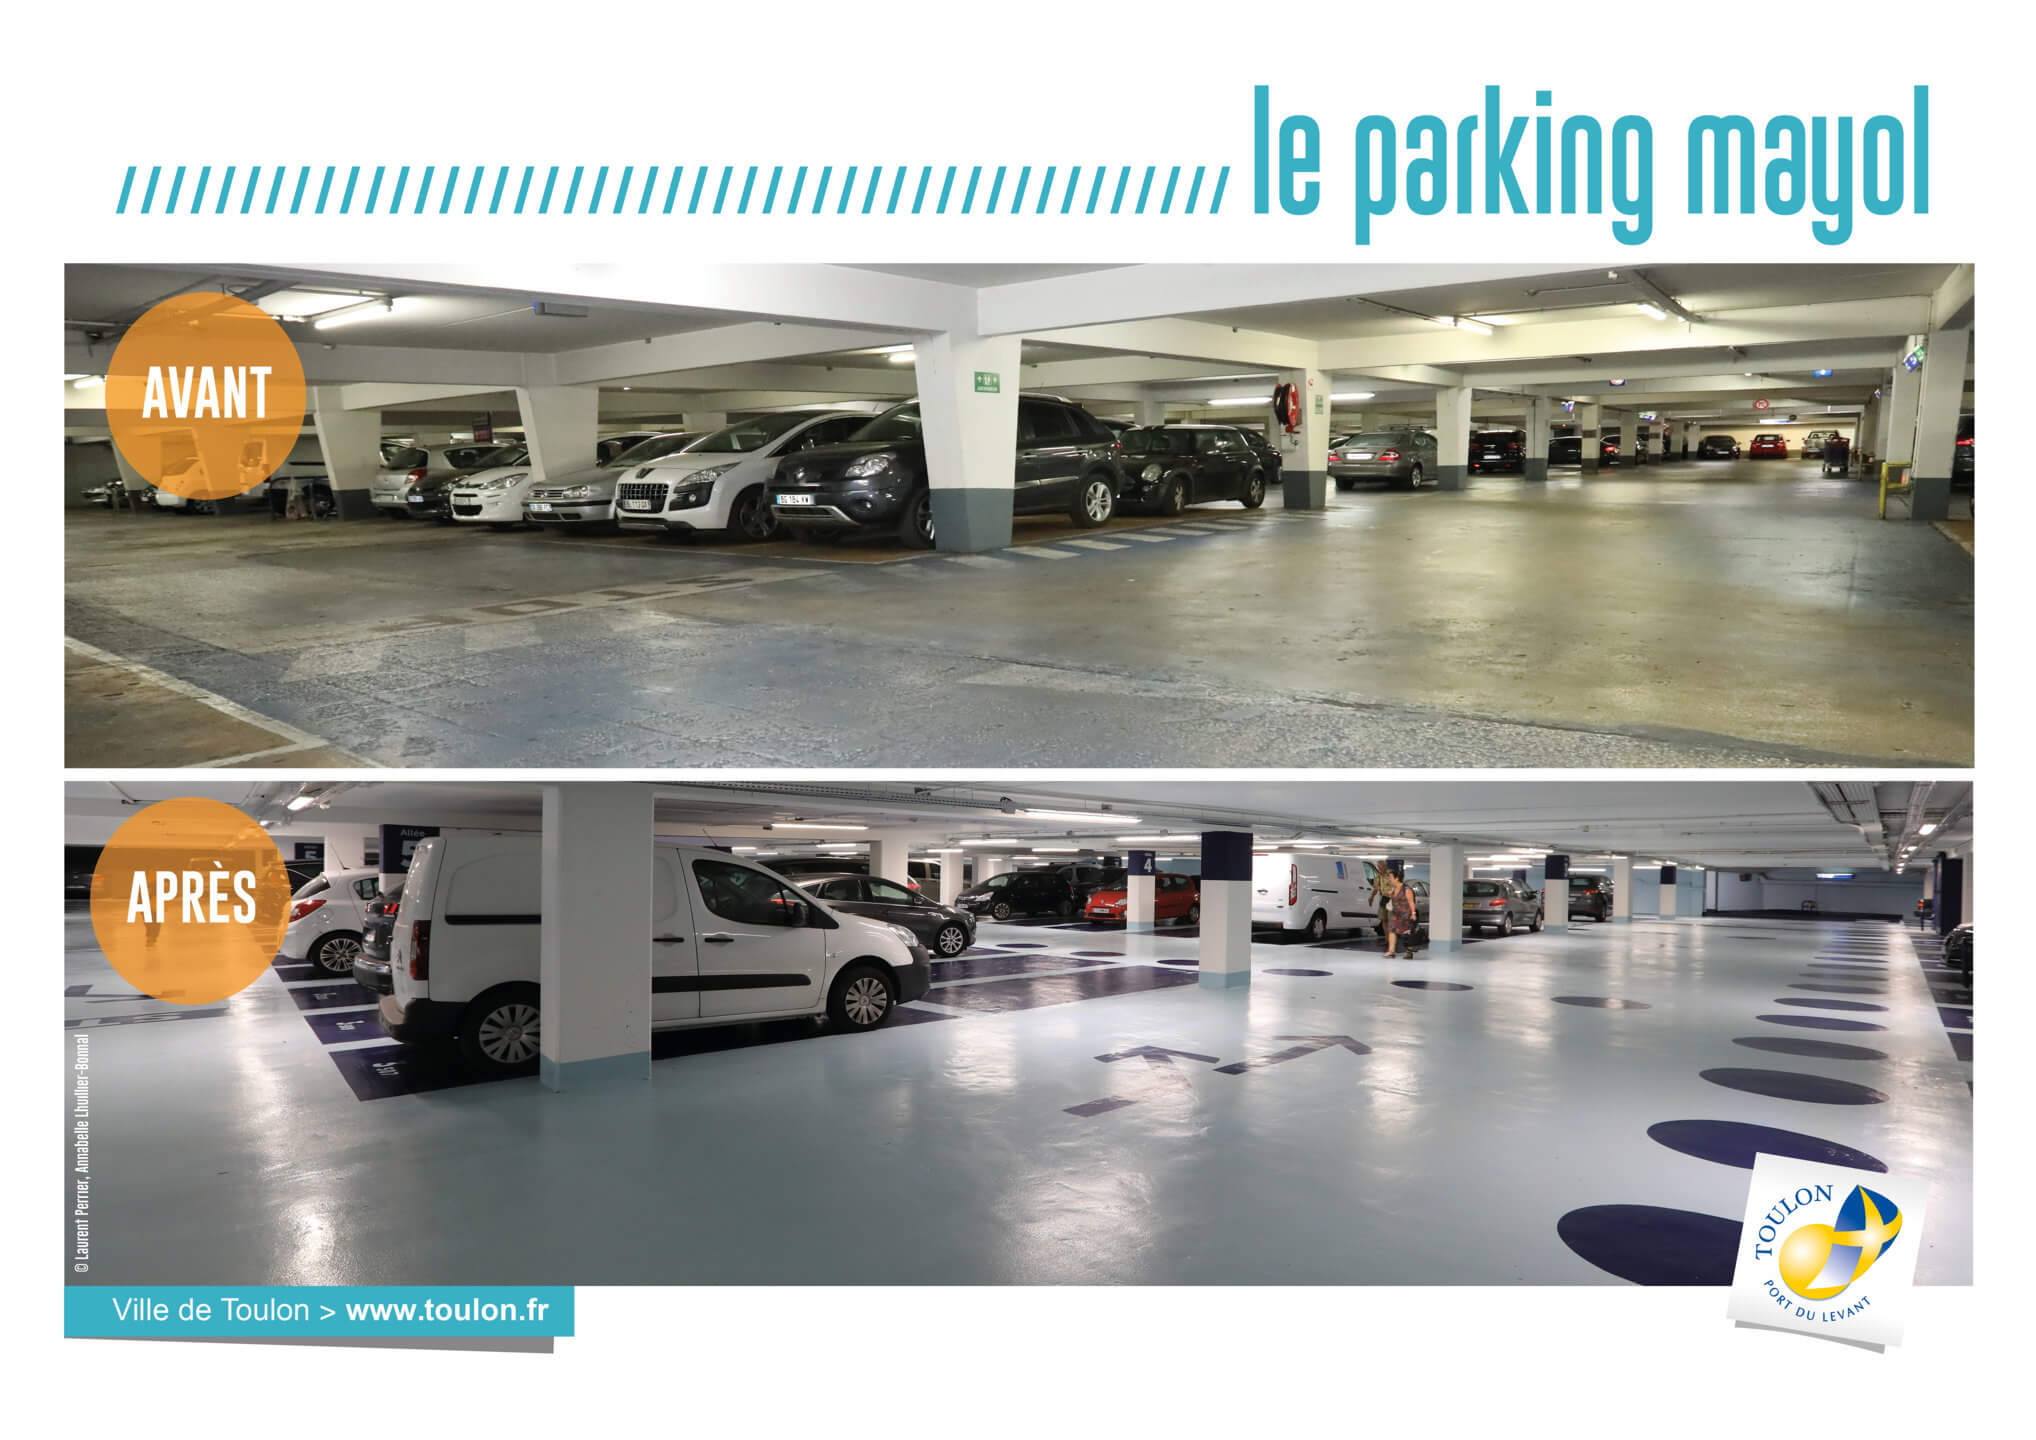 Le parking mayol